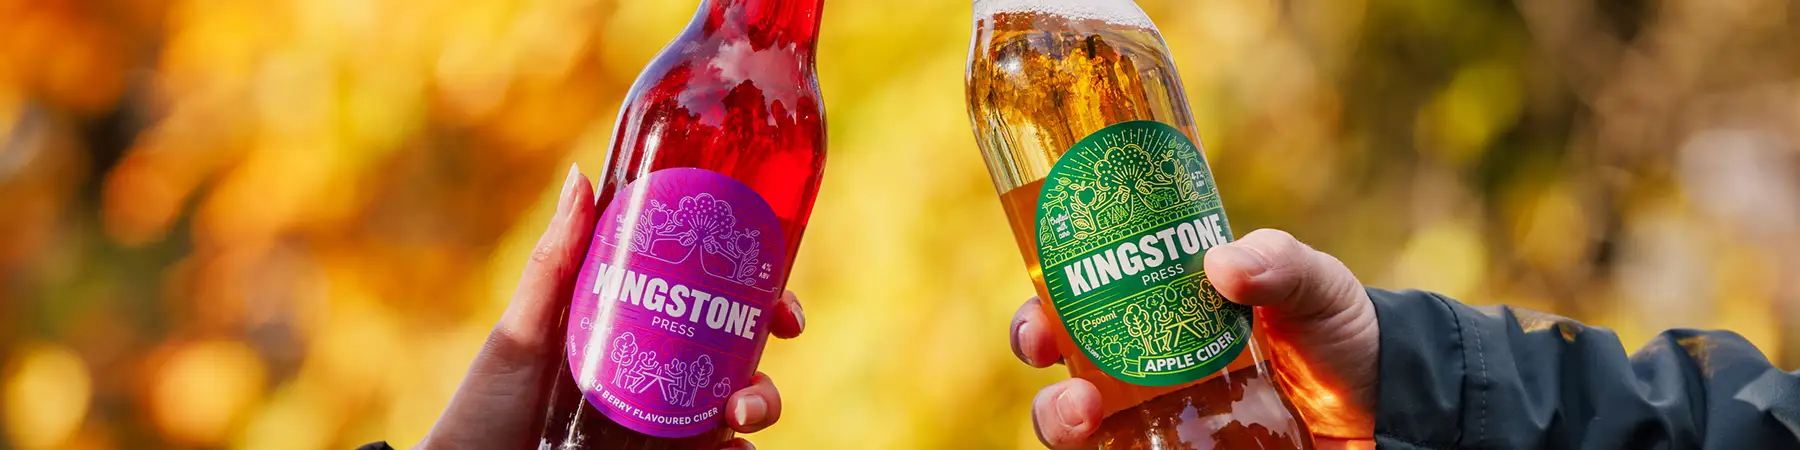 2 bottles of Kingstone press ciders being held by two people outdoors